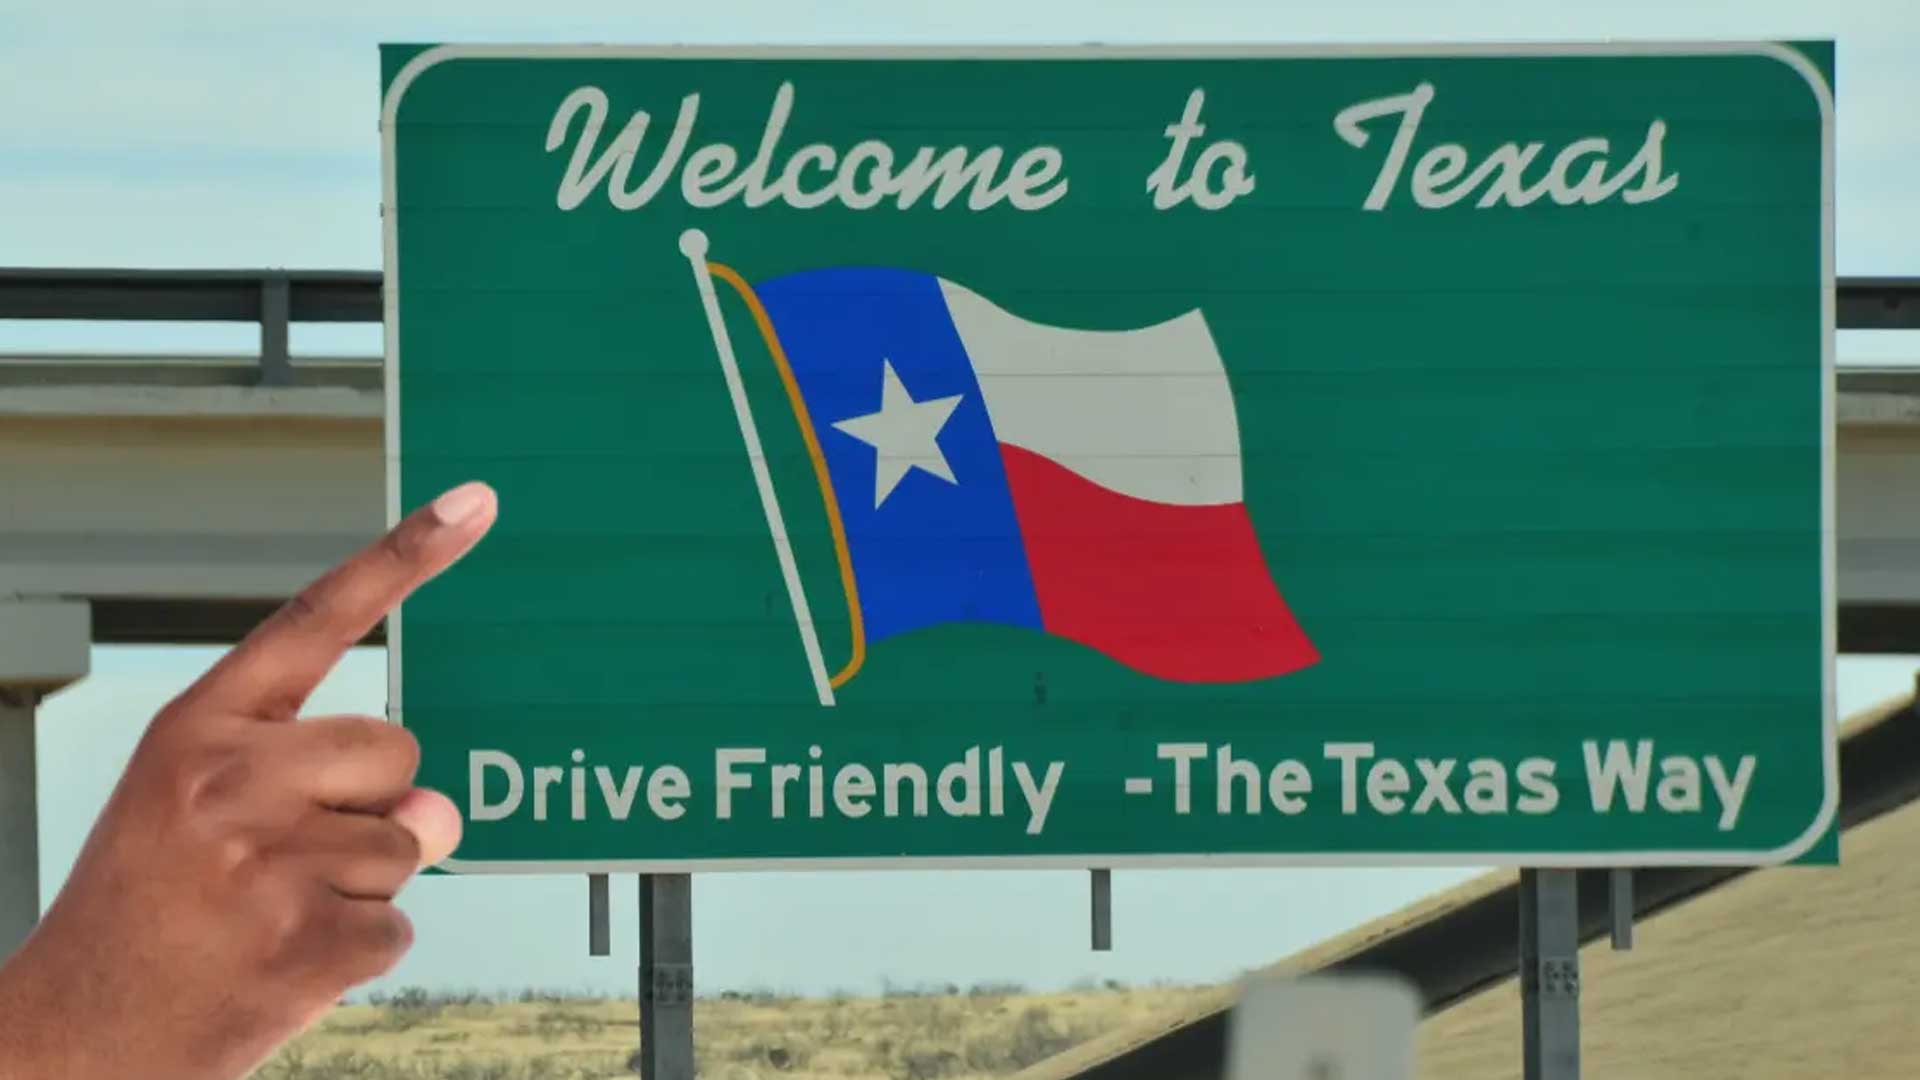 A roadsign in Texas